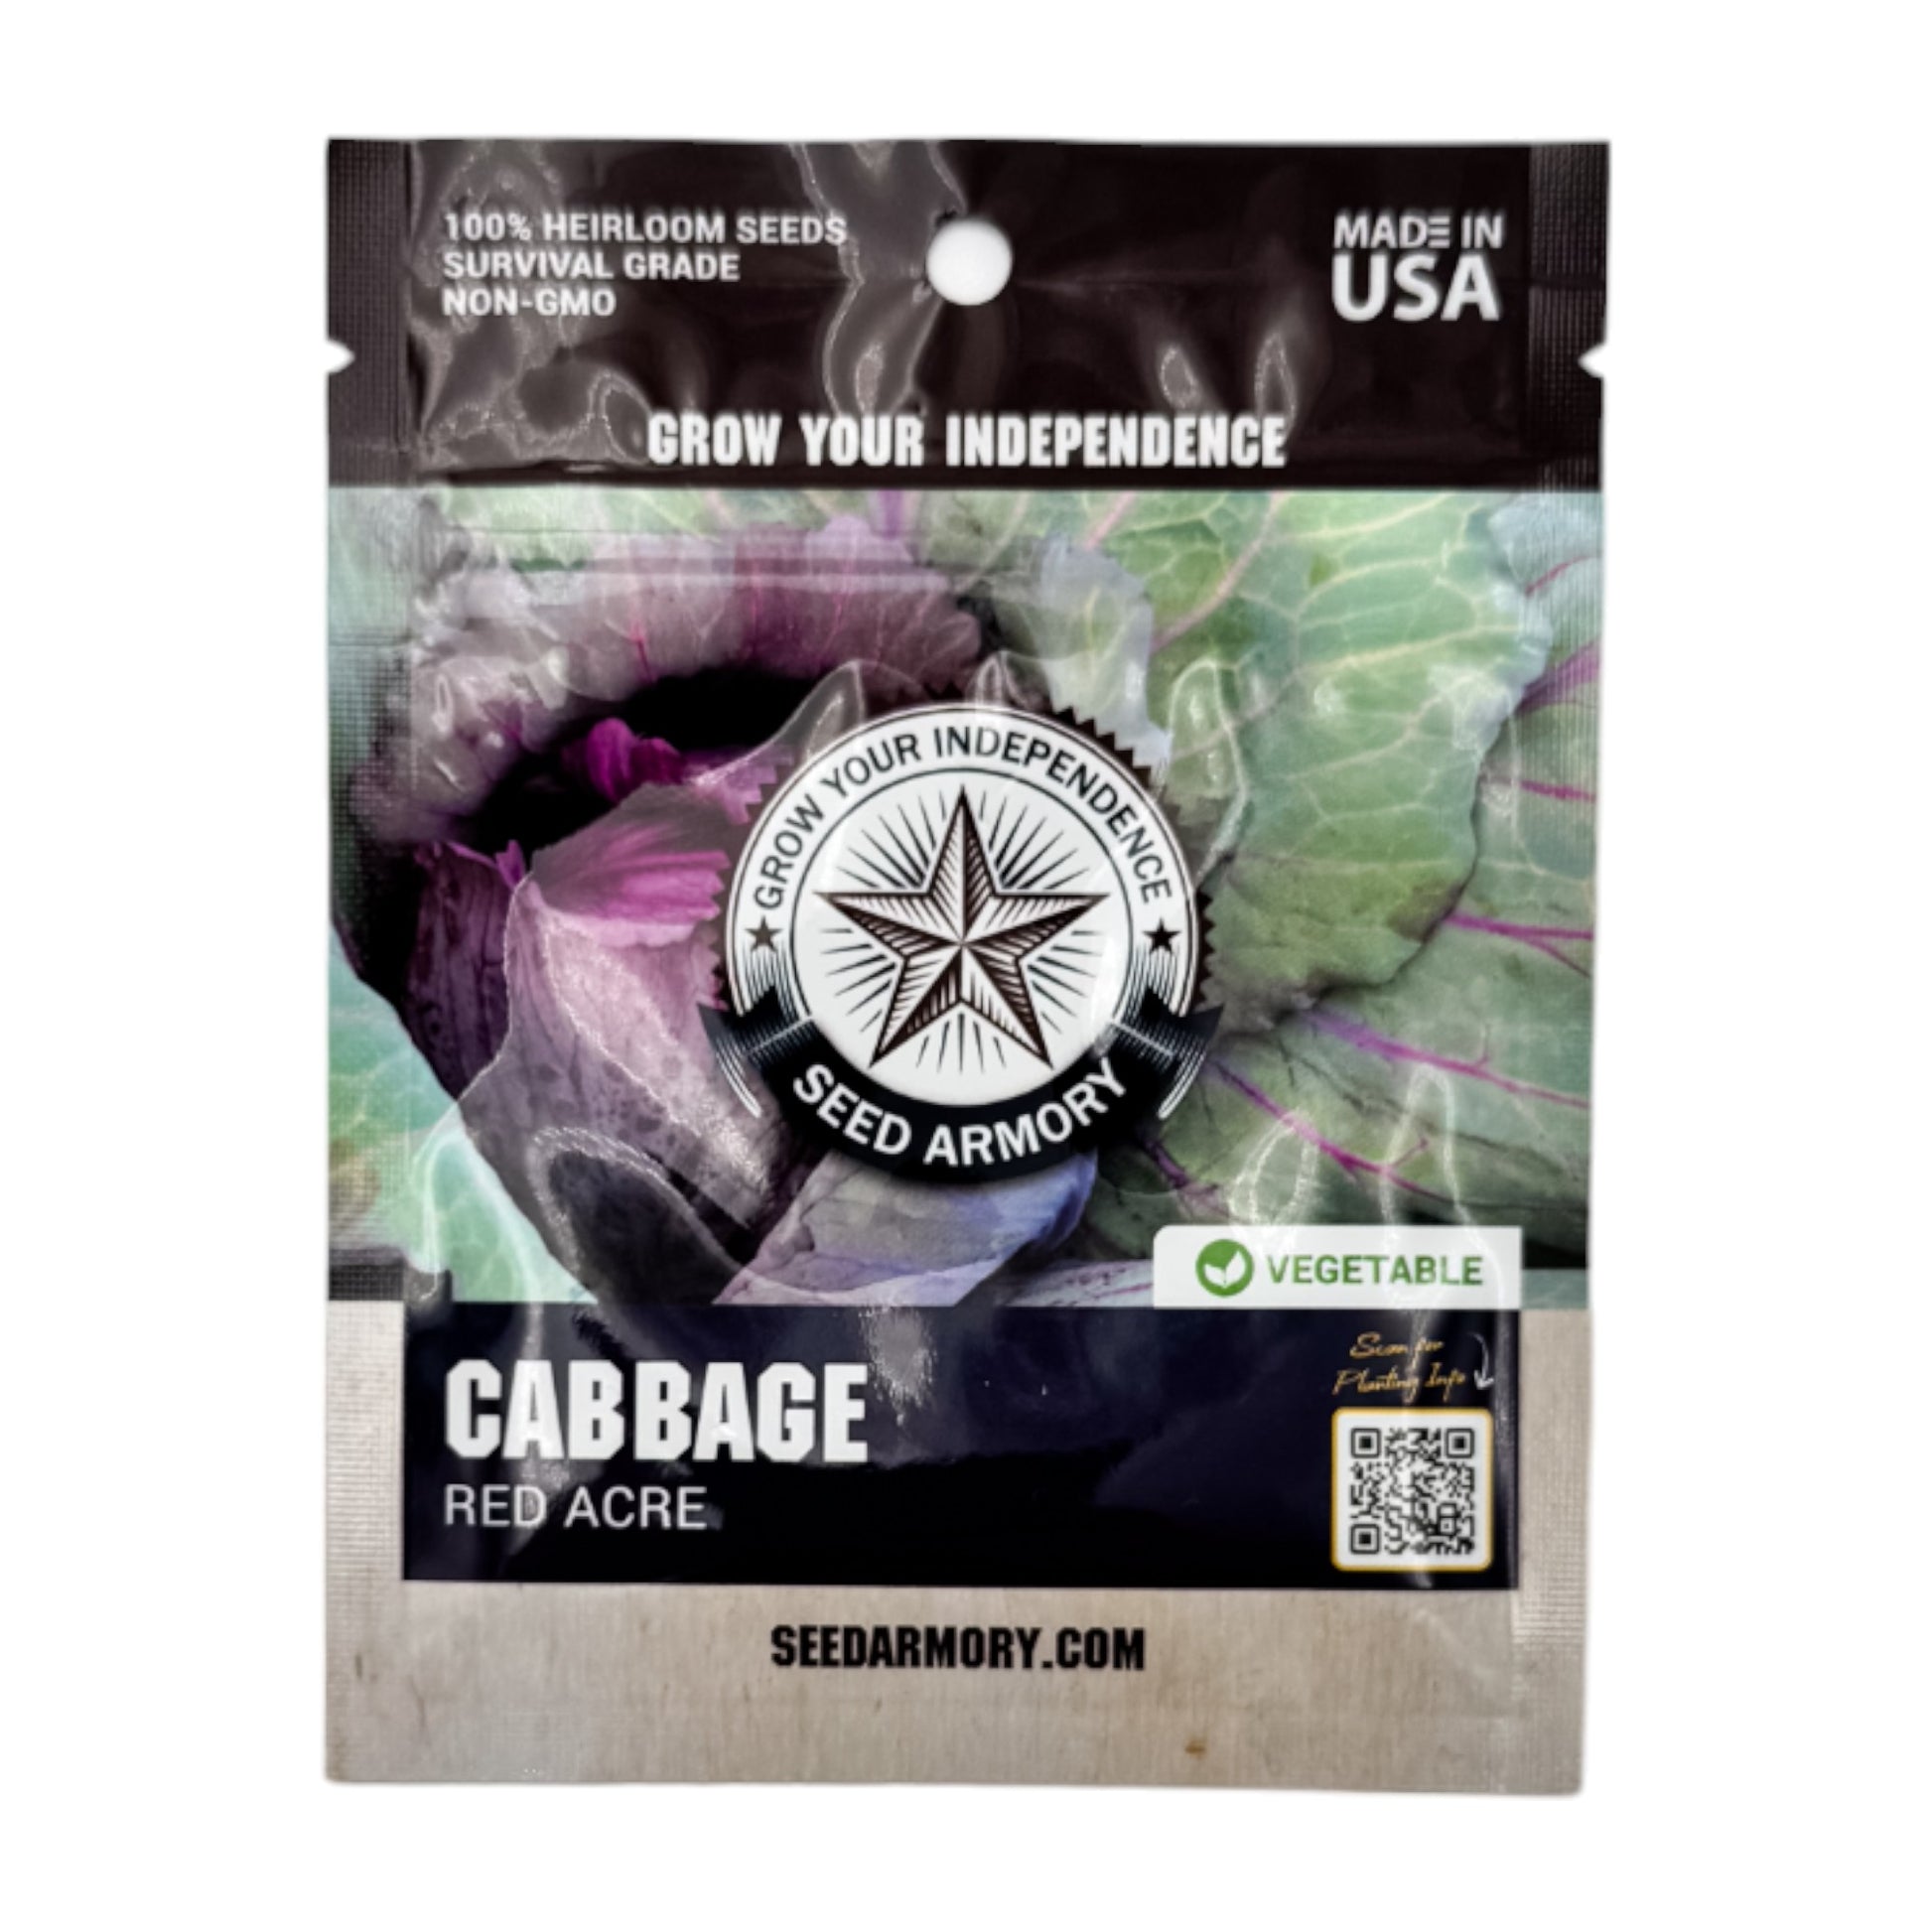 Packet of Red Acre cabbage heirloom seeds